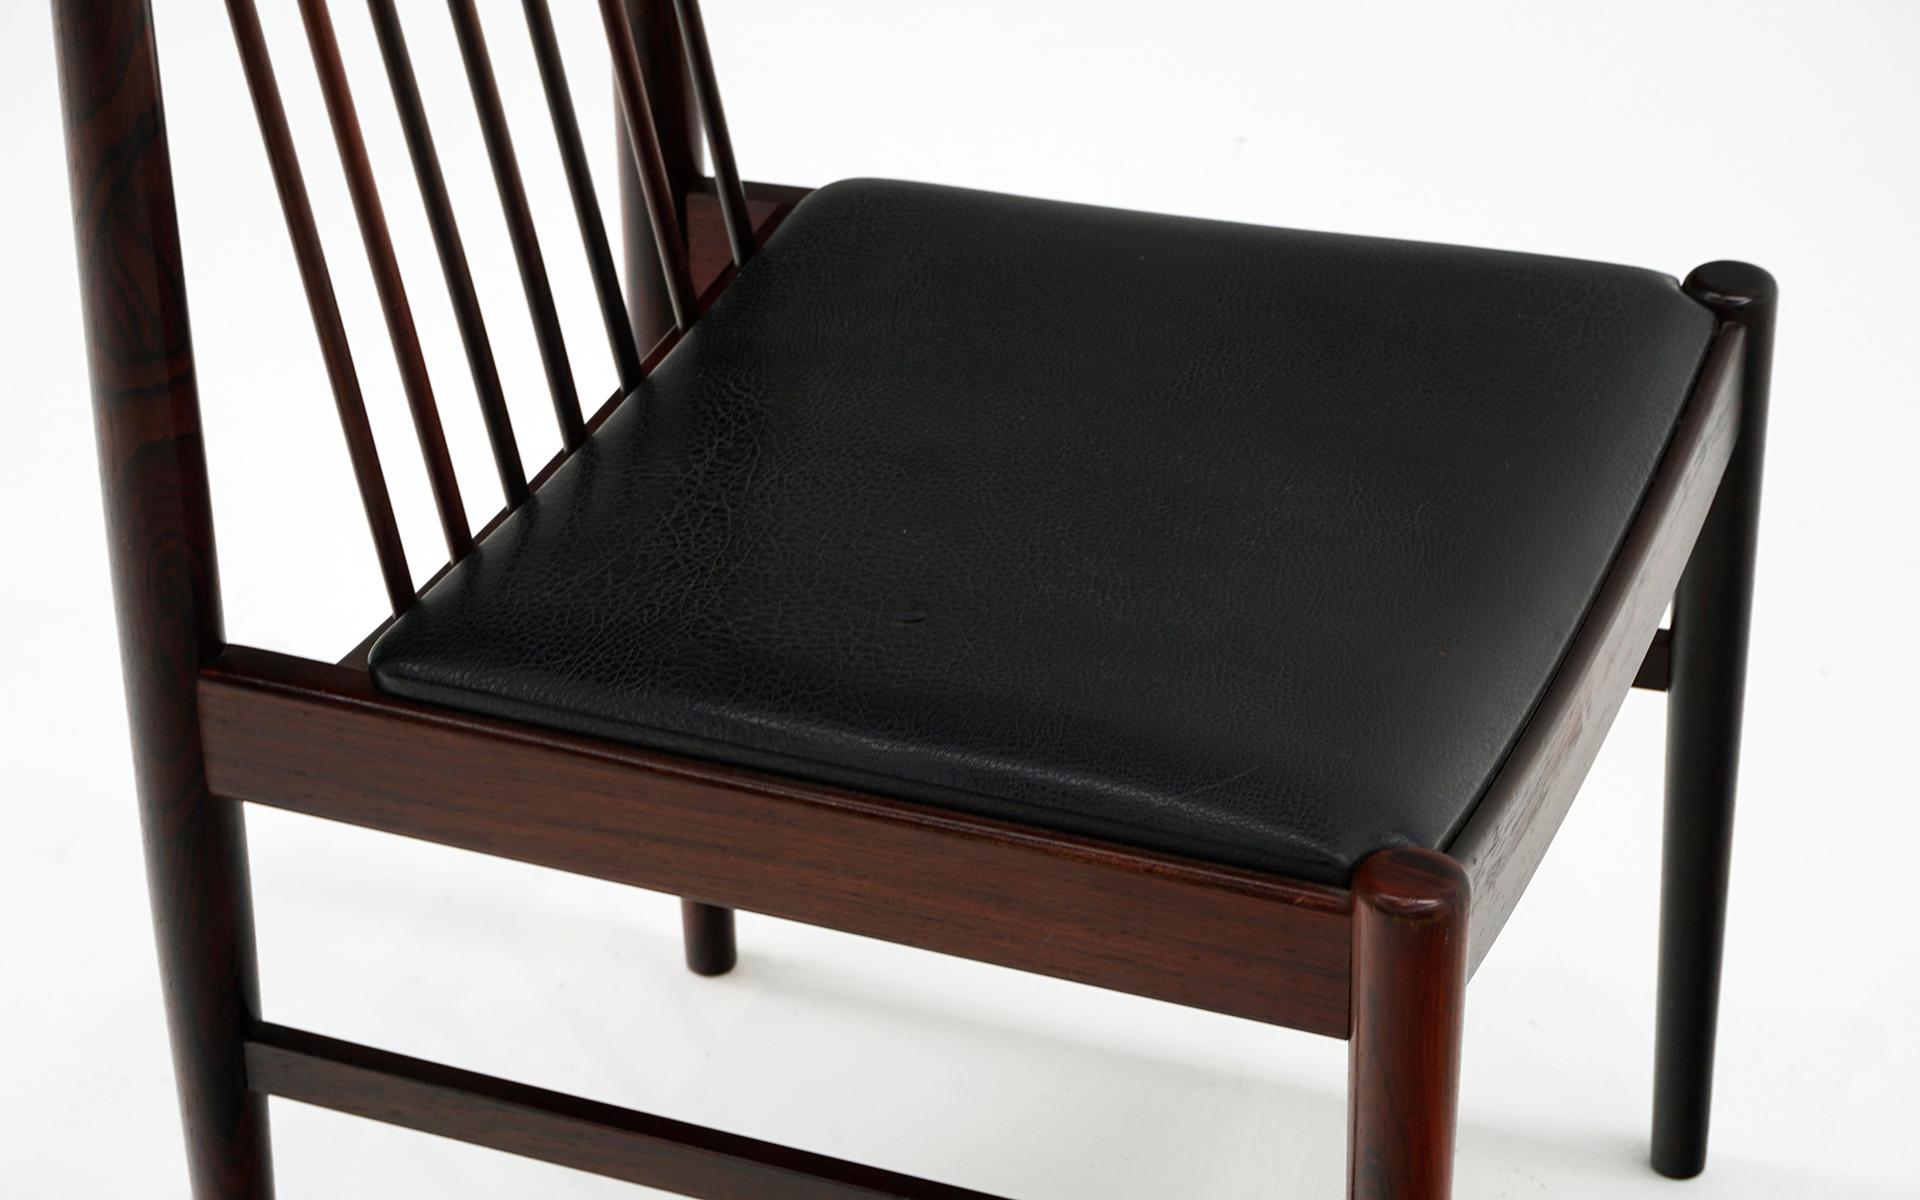 Upholstery One Brazilian Rosewood Dining Chair Model 422 by Arne Vodder for Sibast, Signed. For Sale